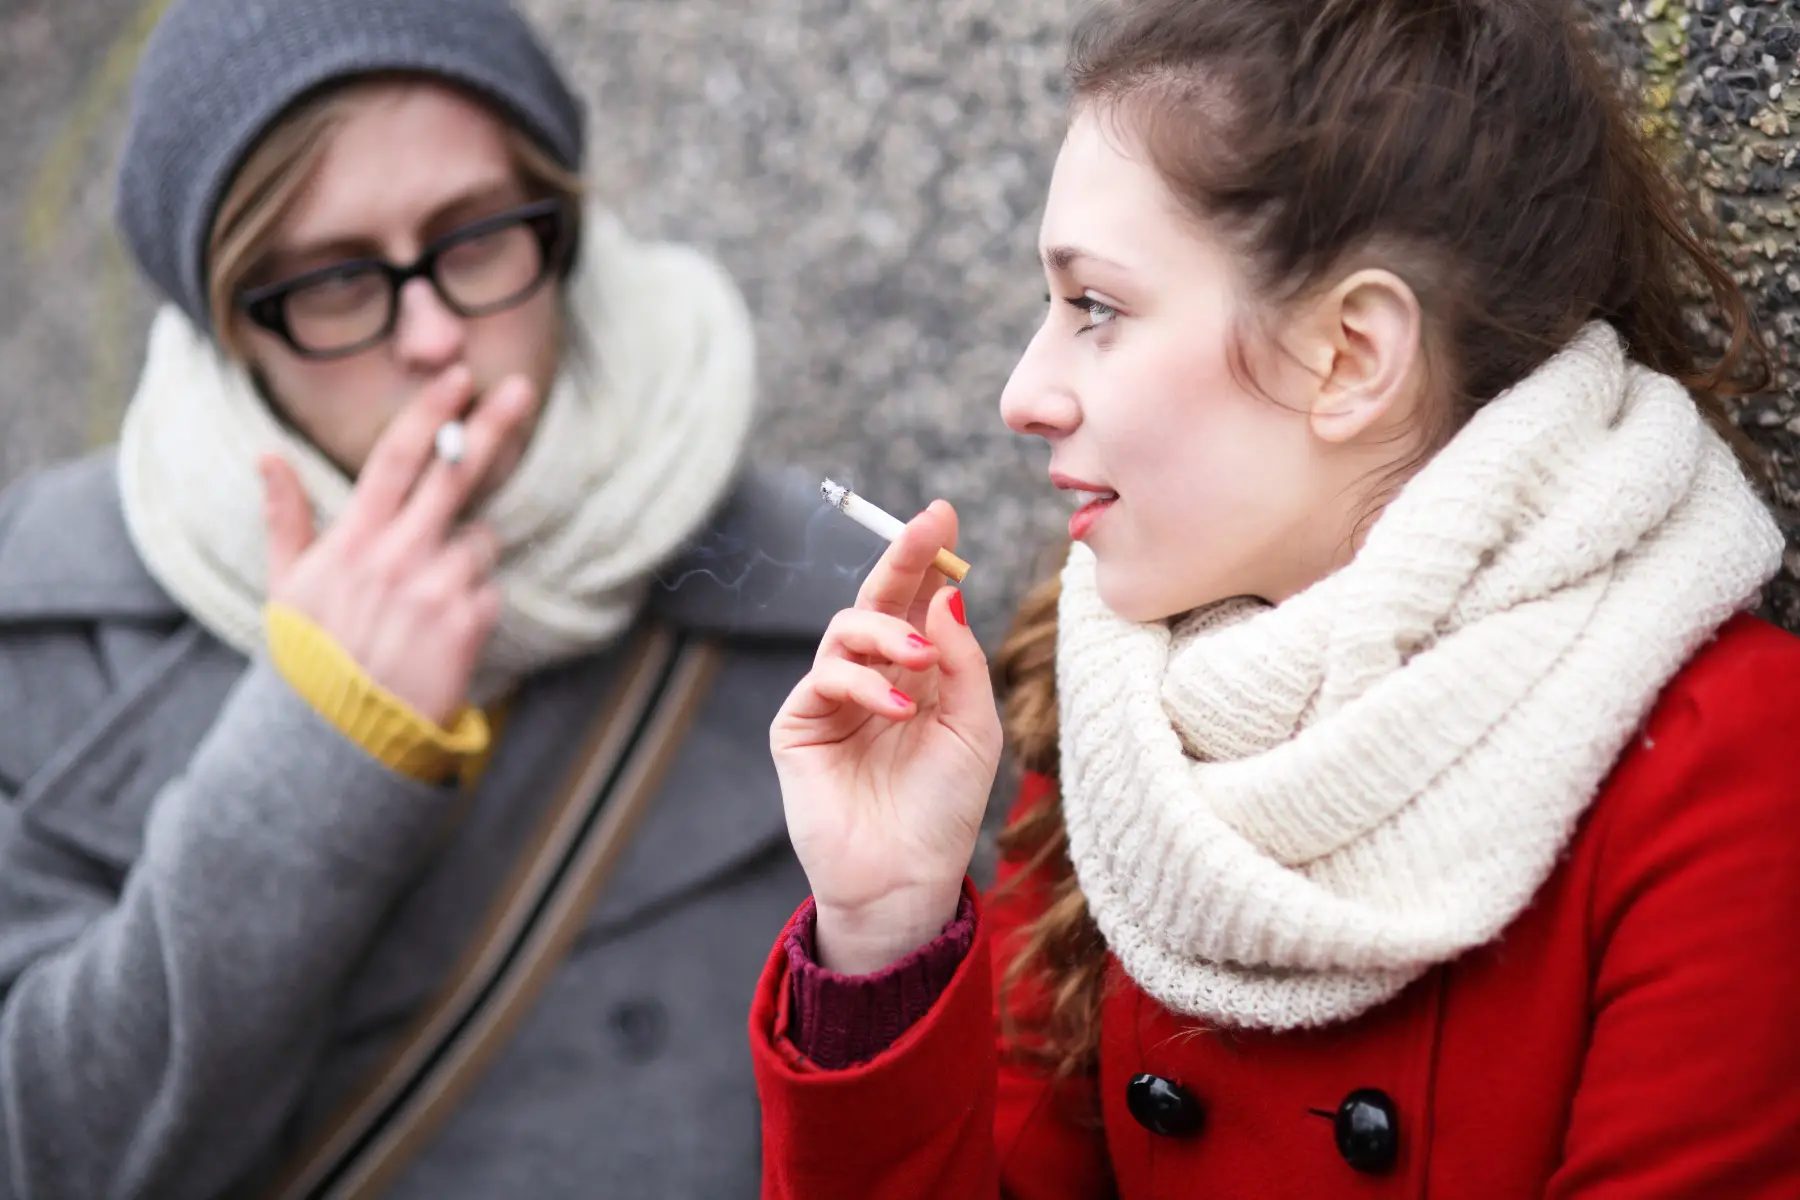 a teenager boy and girl wrapped up in winter clothing and smoking cigarettes outside while having a conversation